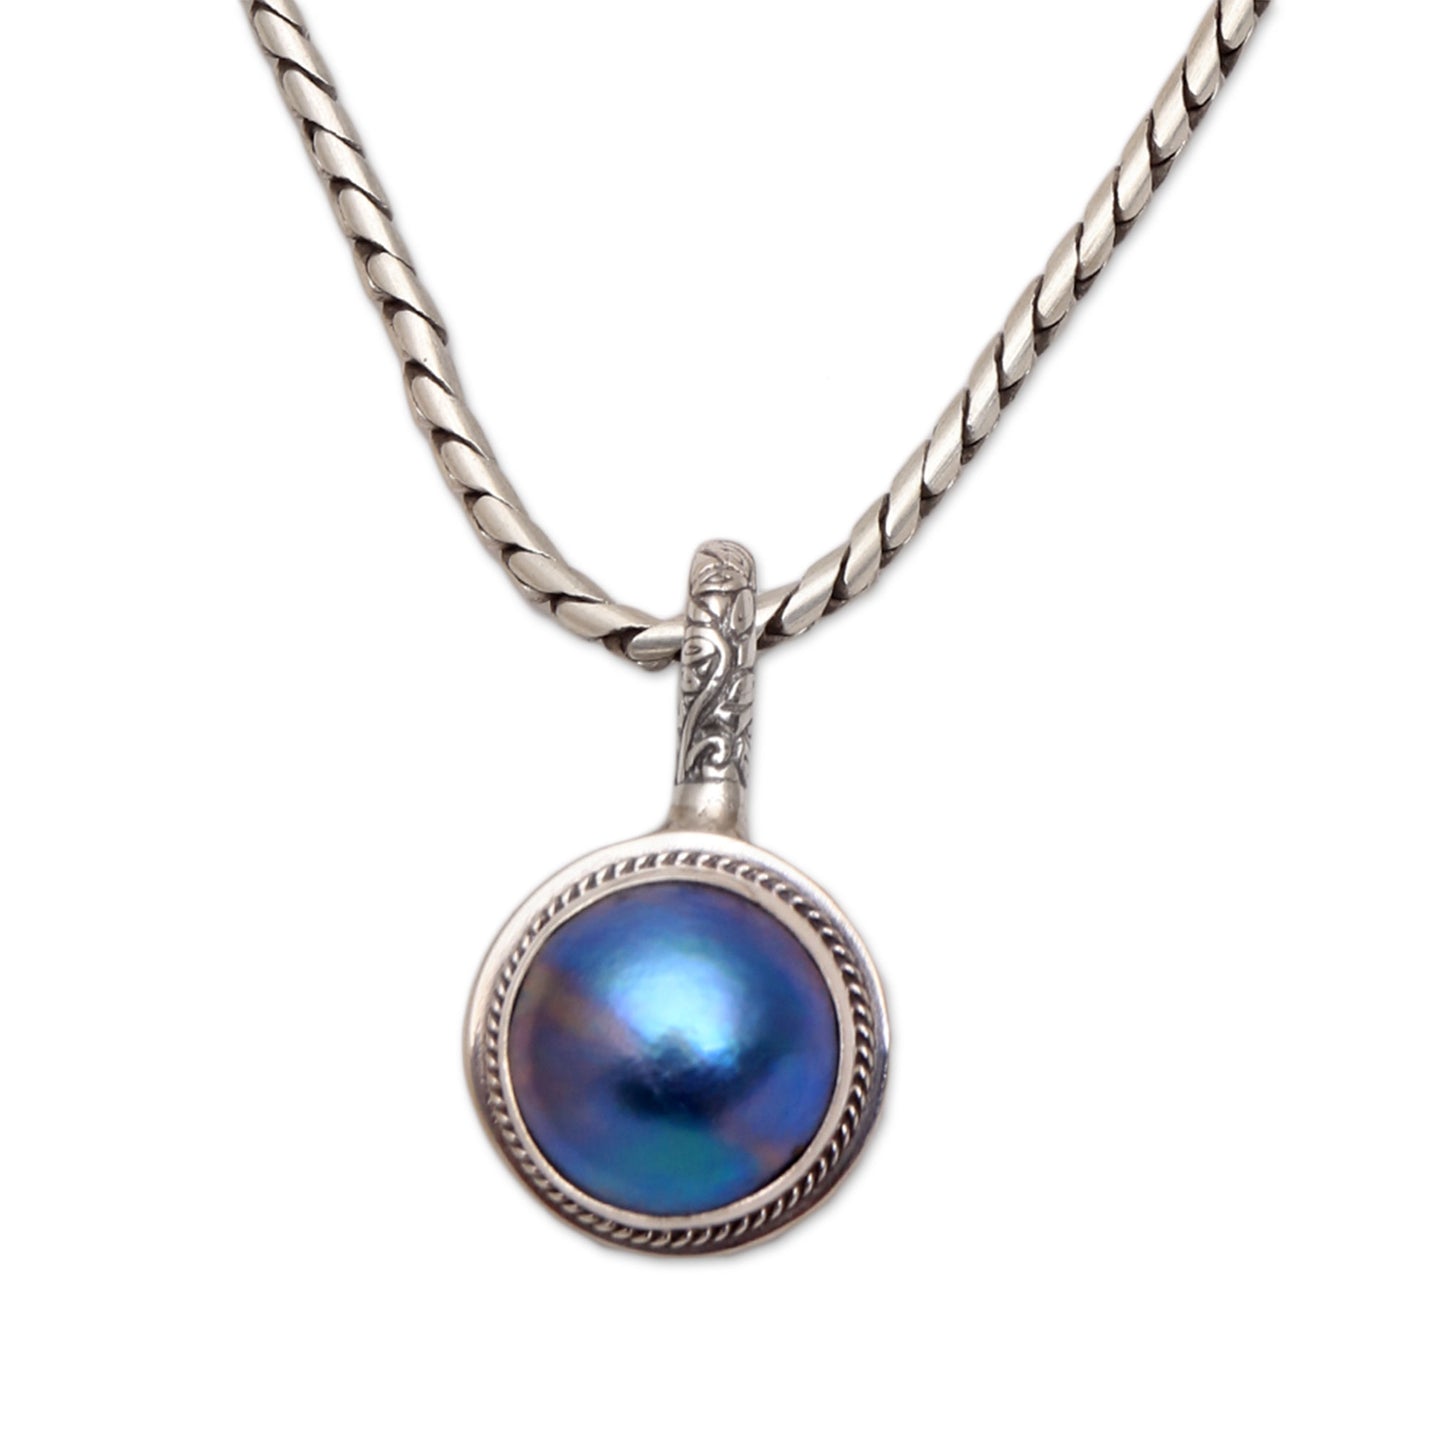 Round Luxury in Blue Blue Cultured Pearl Pendant Necklace from Bali